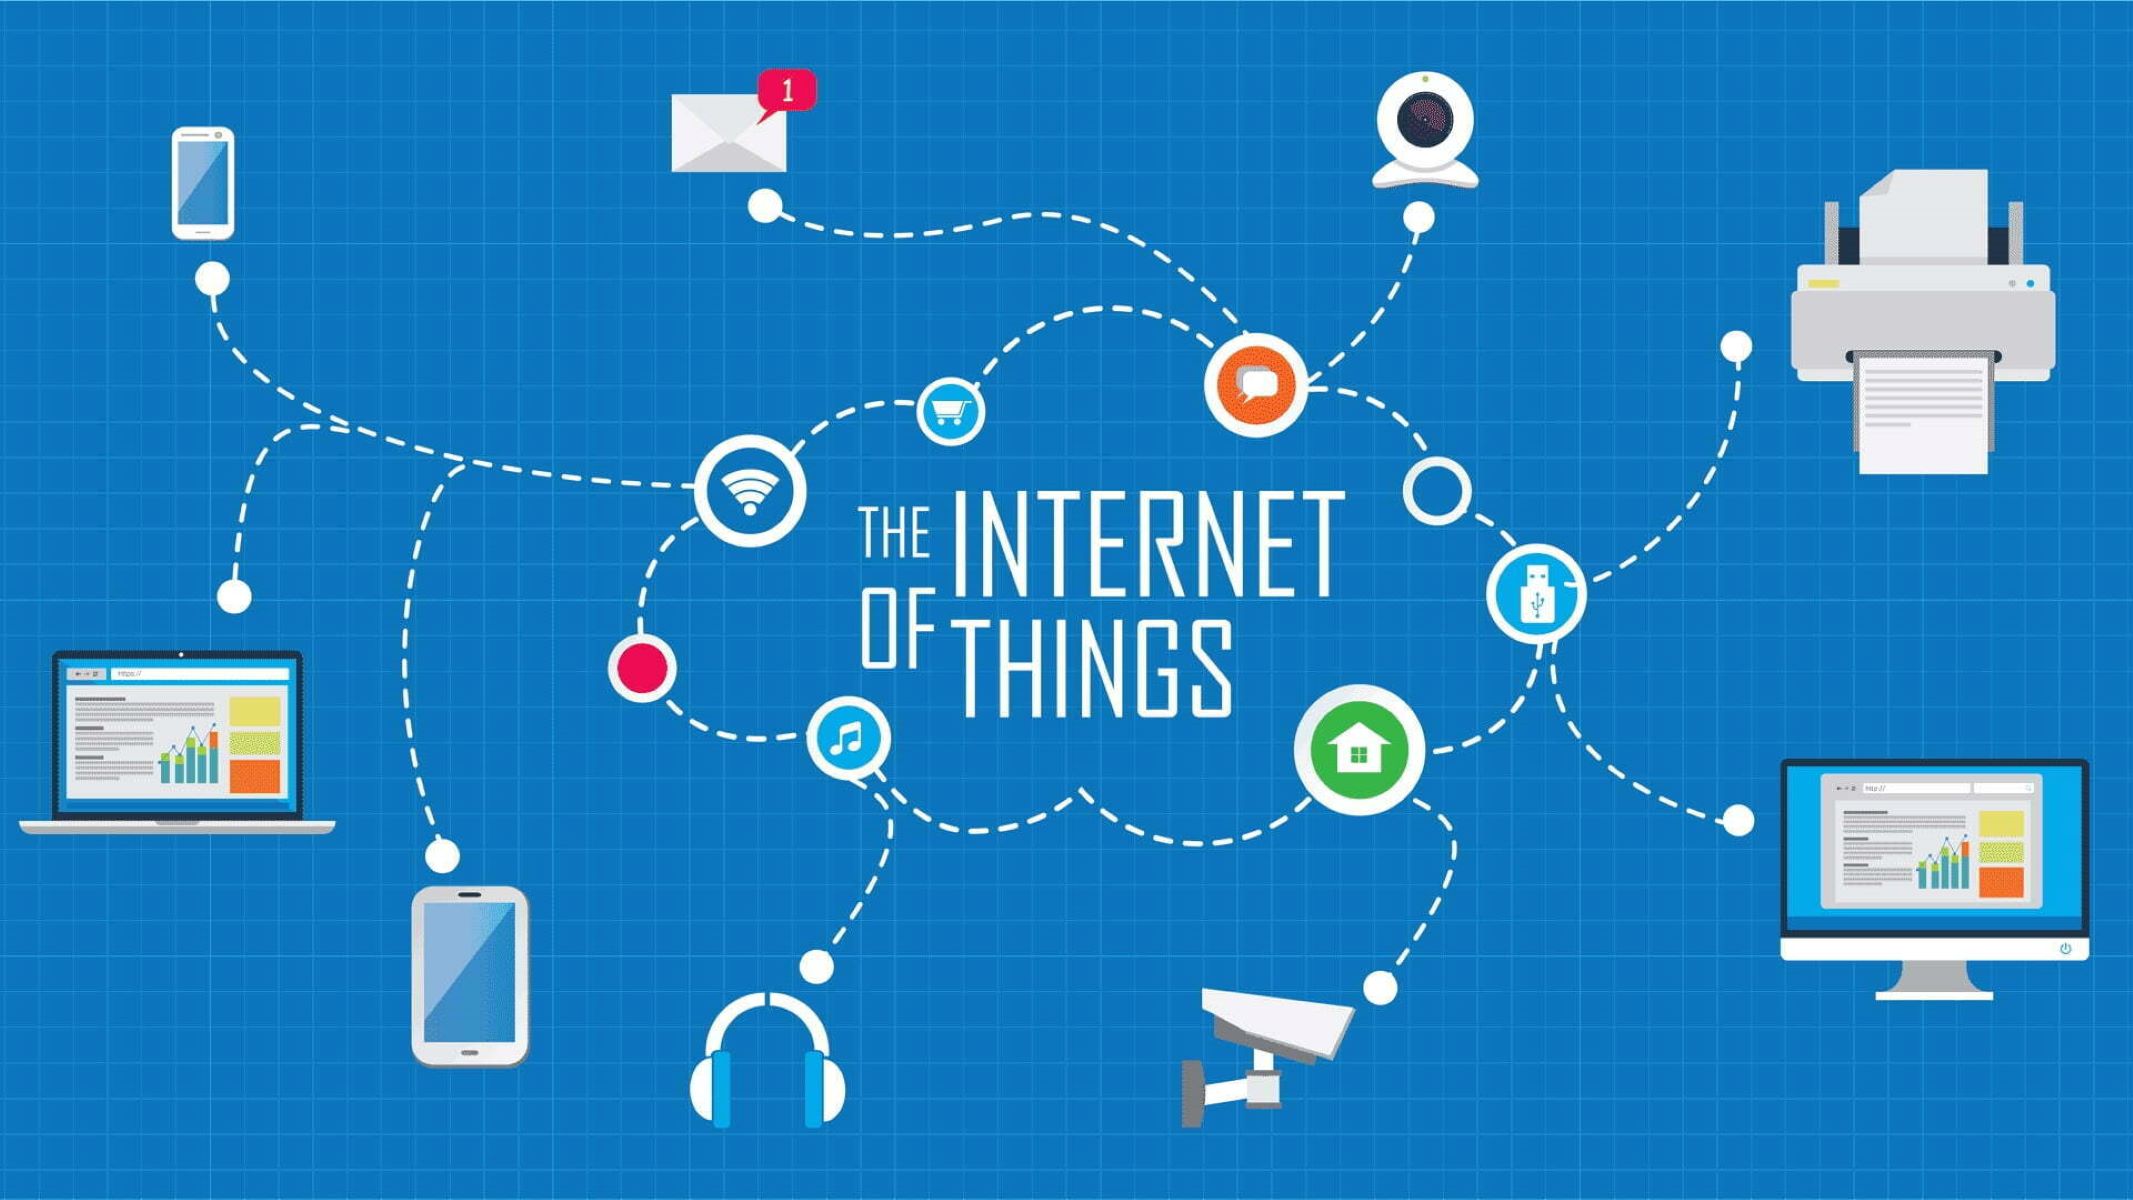 What Is The Motivation For Creating An Internet Of Things By Embedding